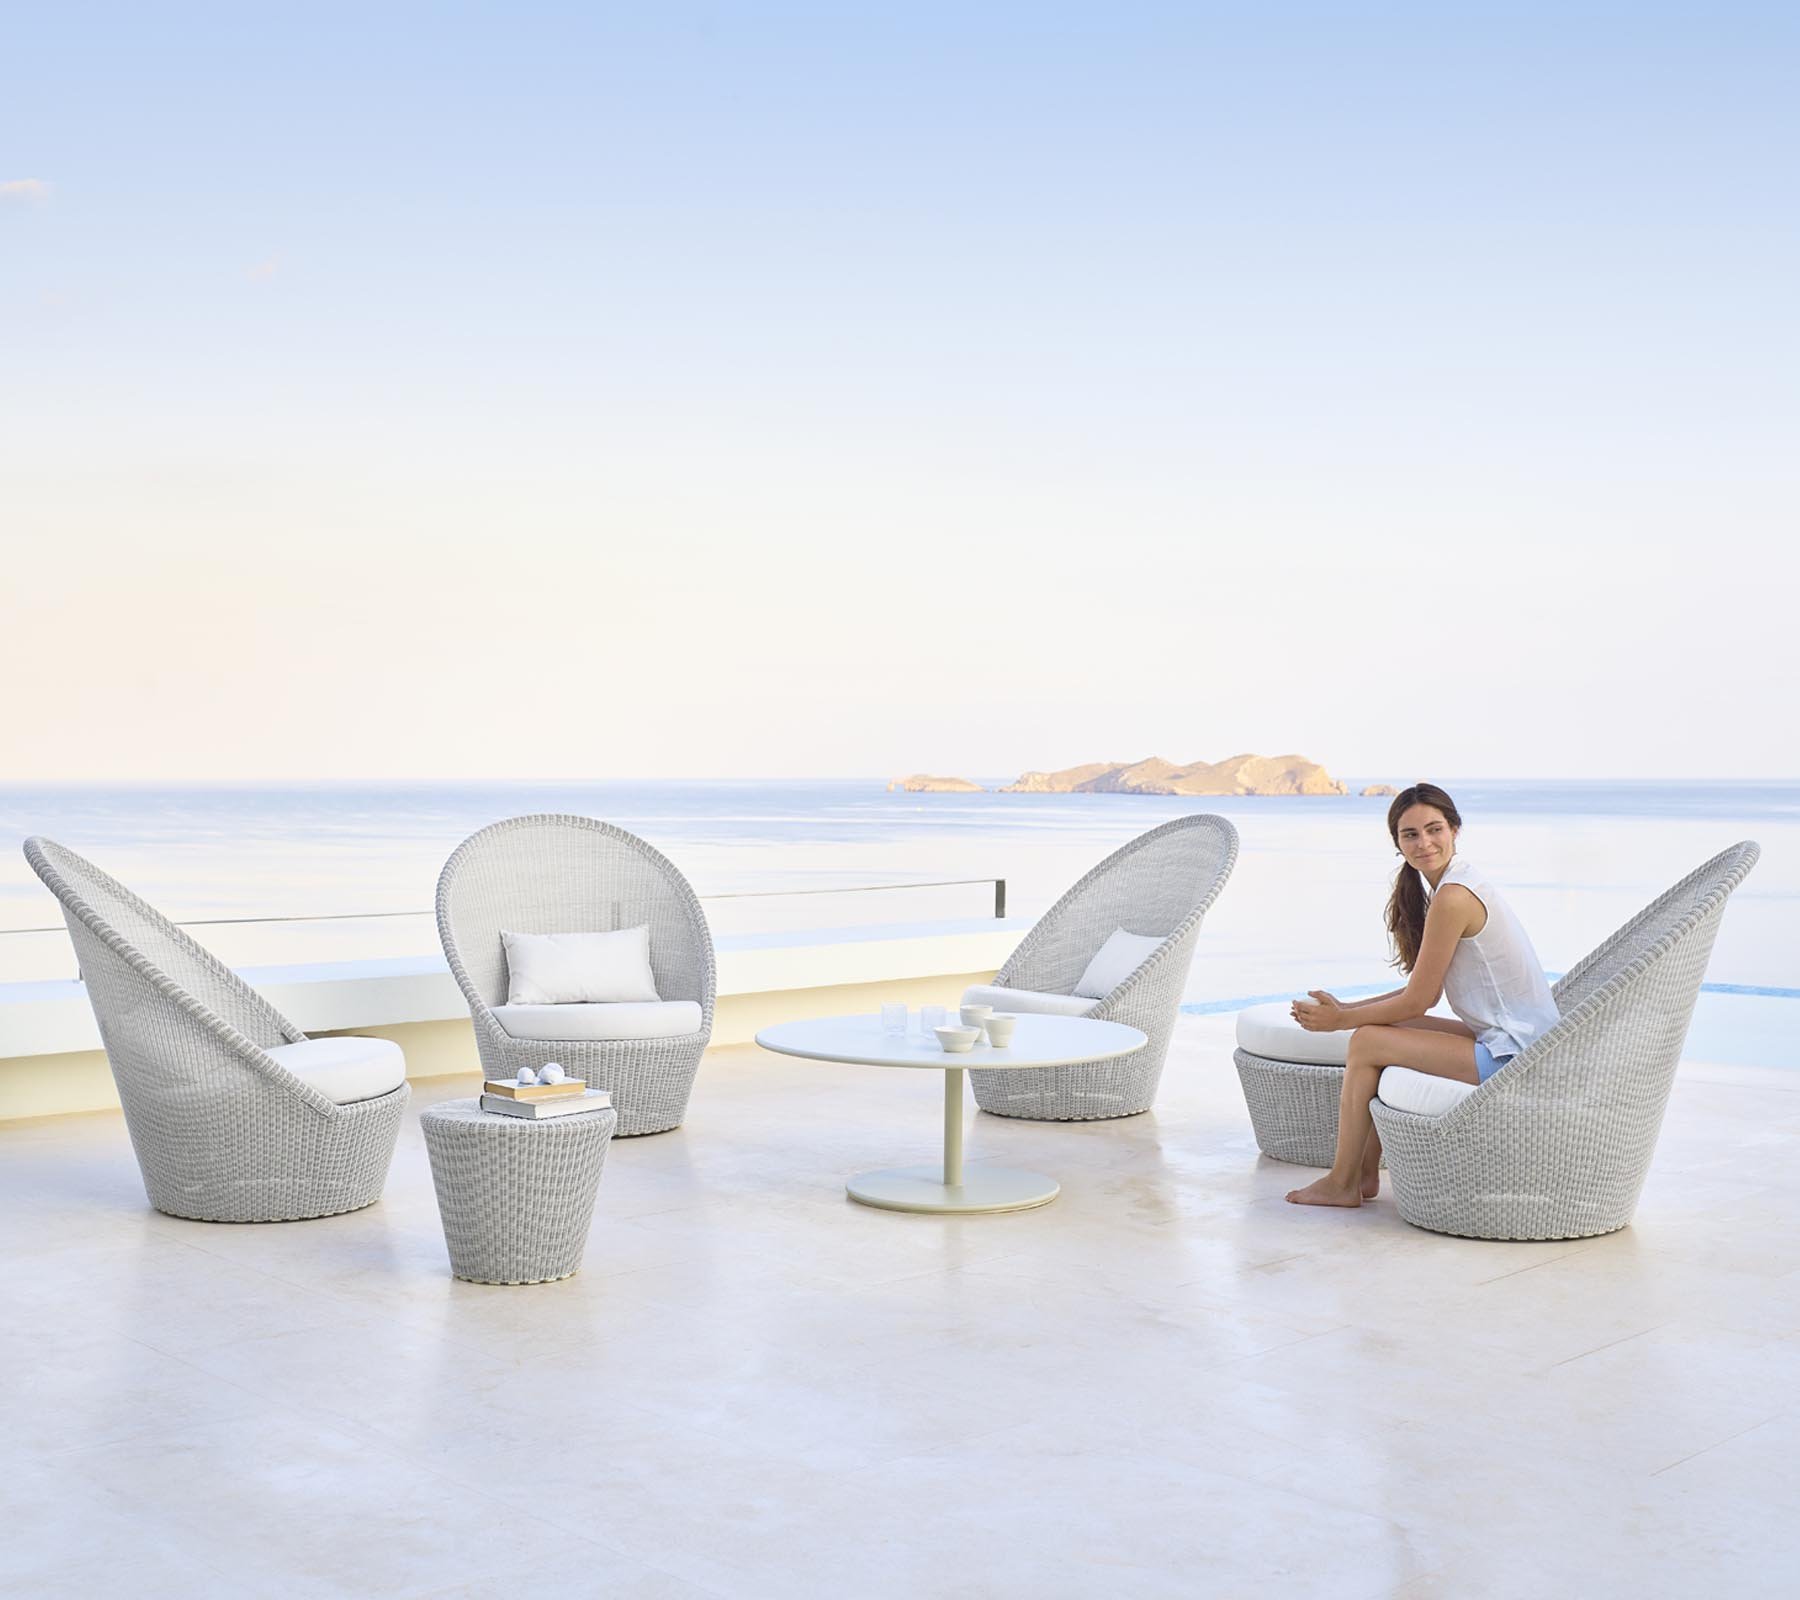 Cane-line Kingston Sunchair | Wooden | Outdoor-Patio Furniture - Ultra ...